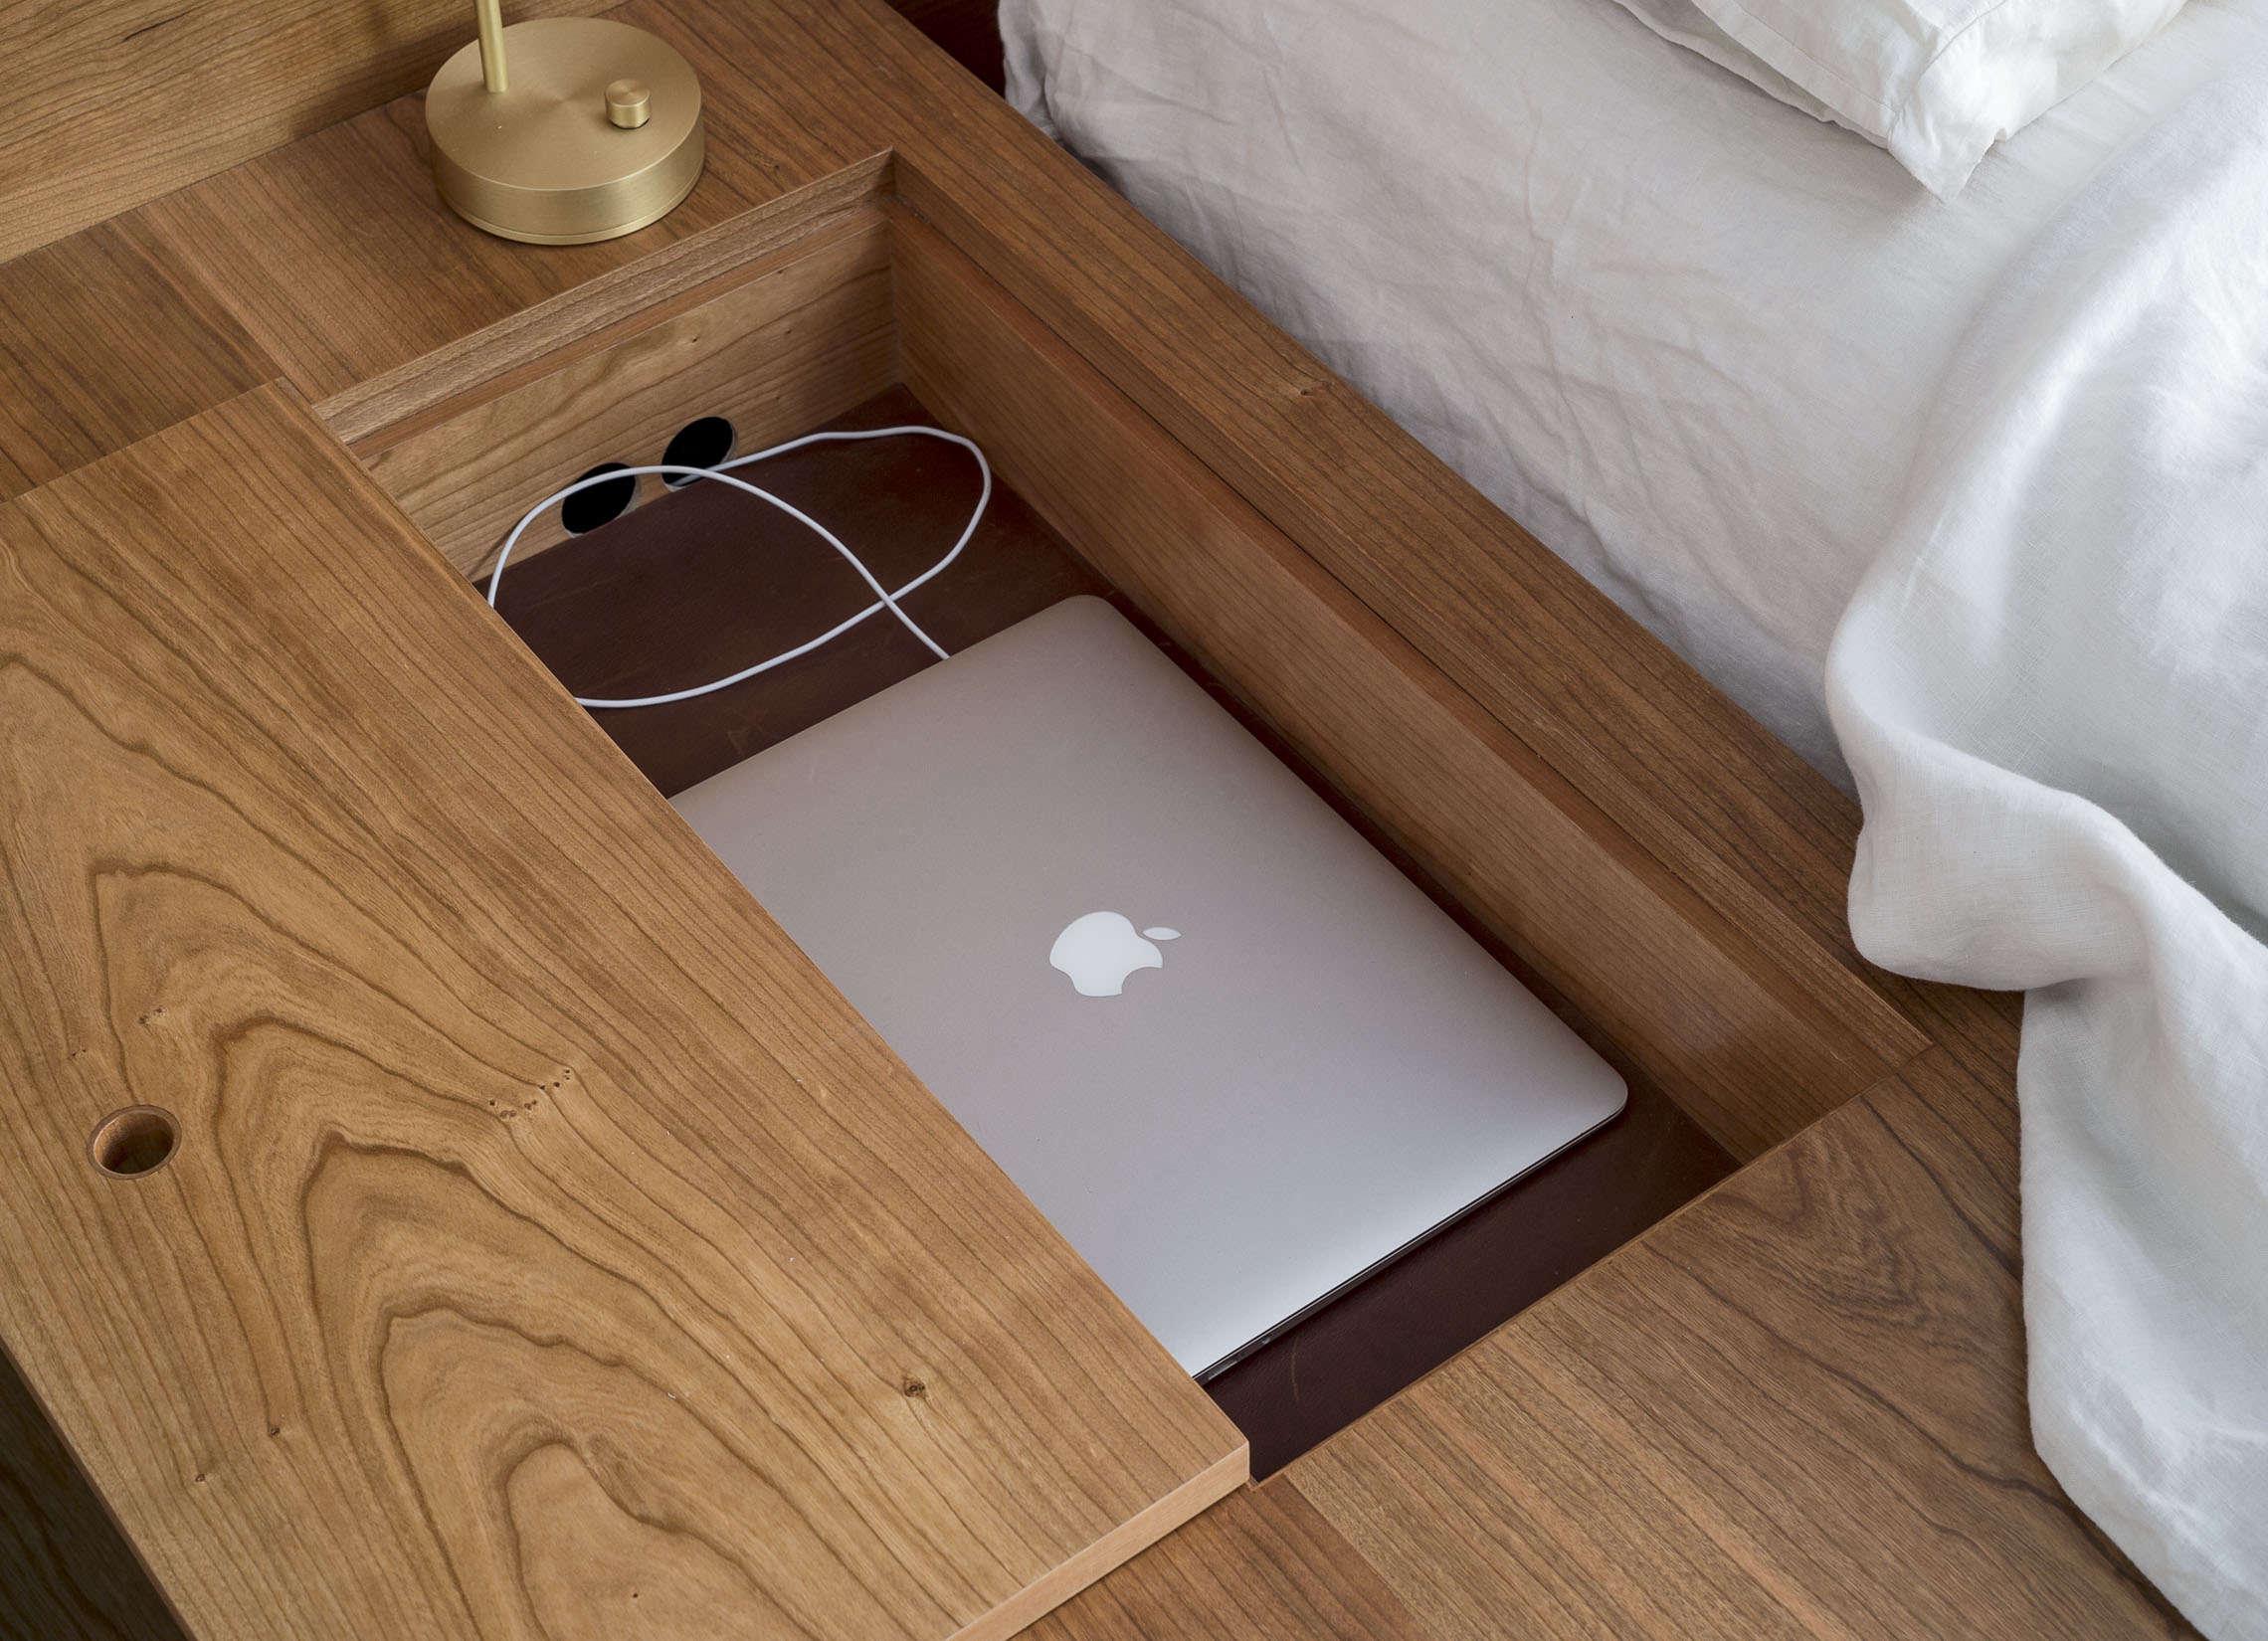 A custom platform bed tricked out with a compartment for devices. Photograph by Matthew Williams, courtesy of Workstead, from The Craftsman-Made NYC Apartment, Workstead Edition.